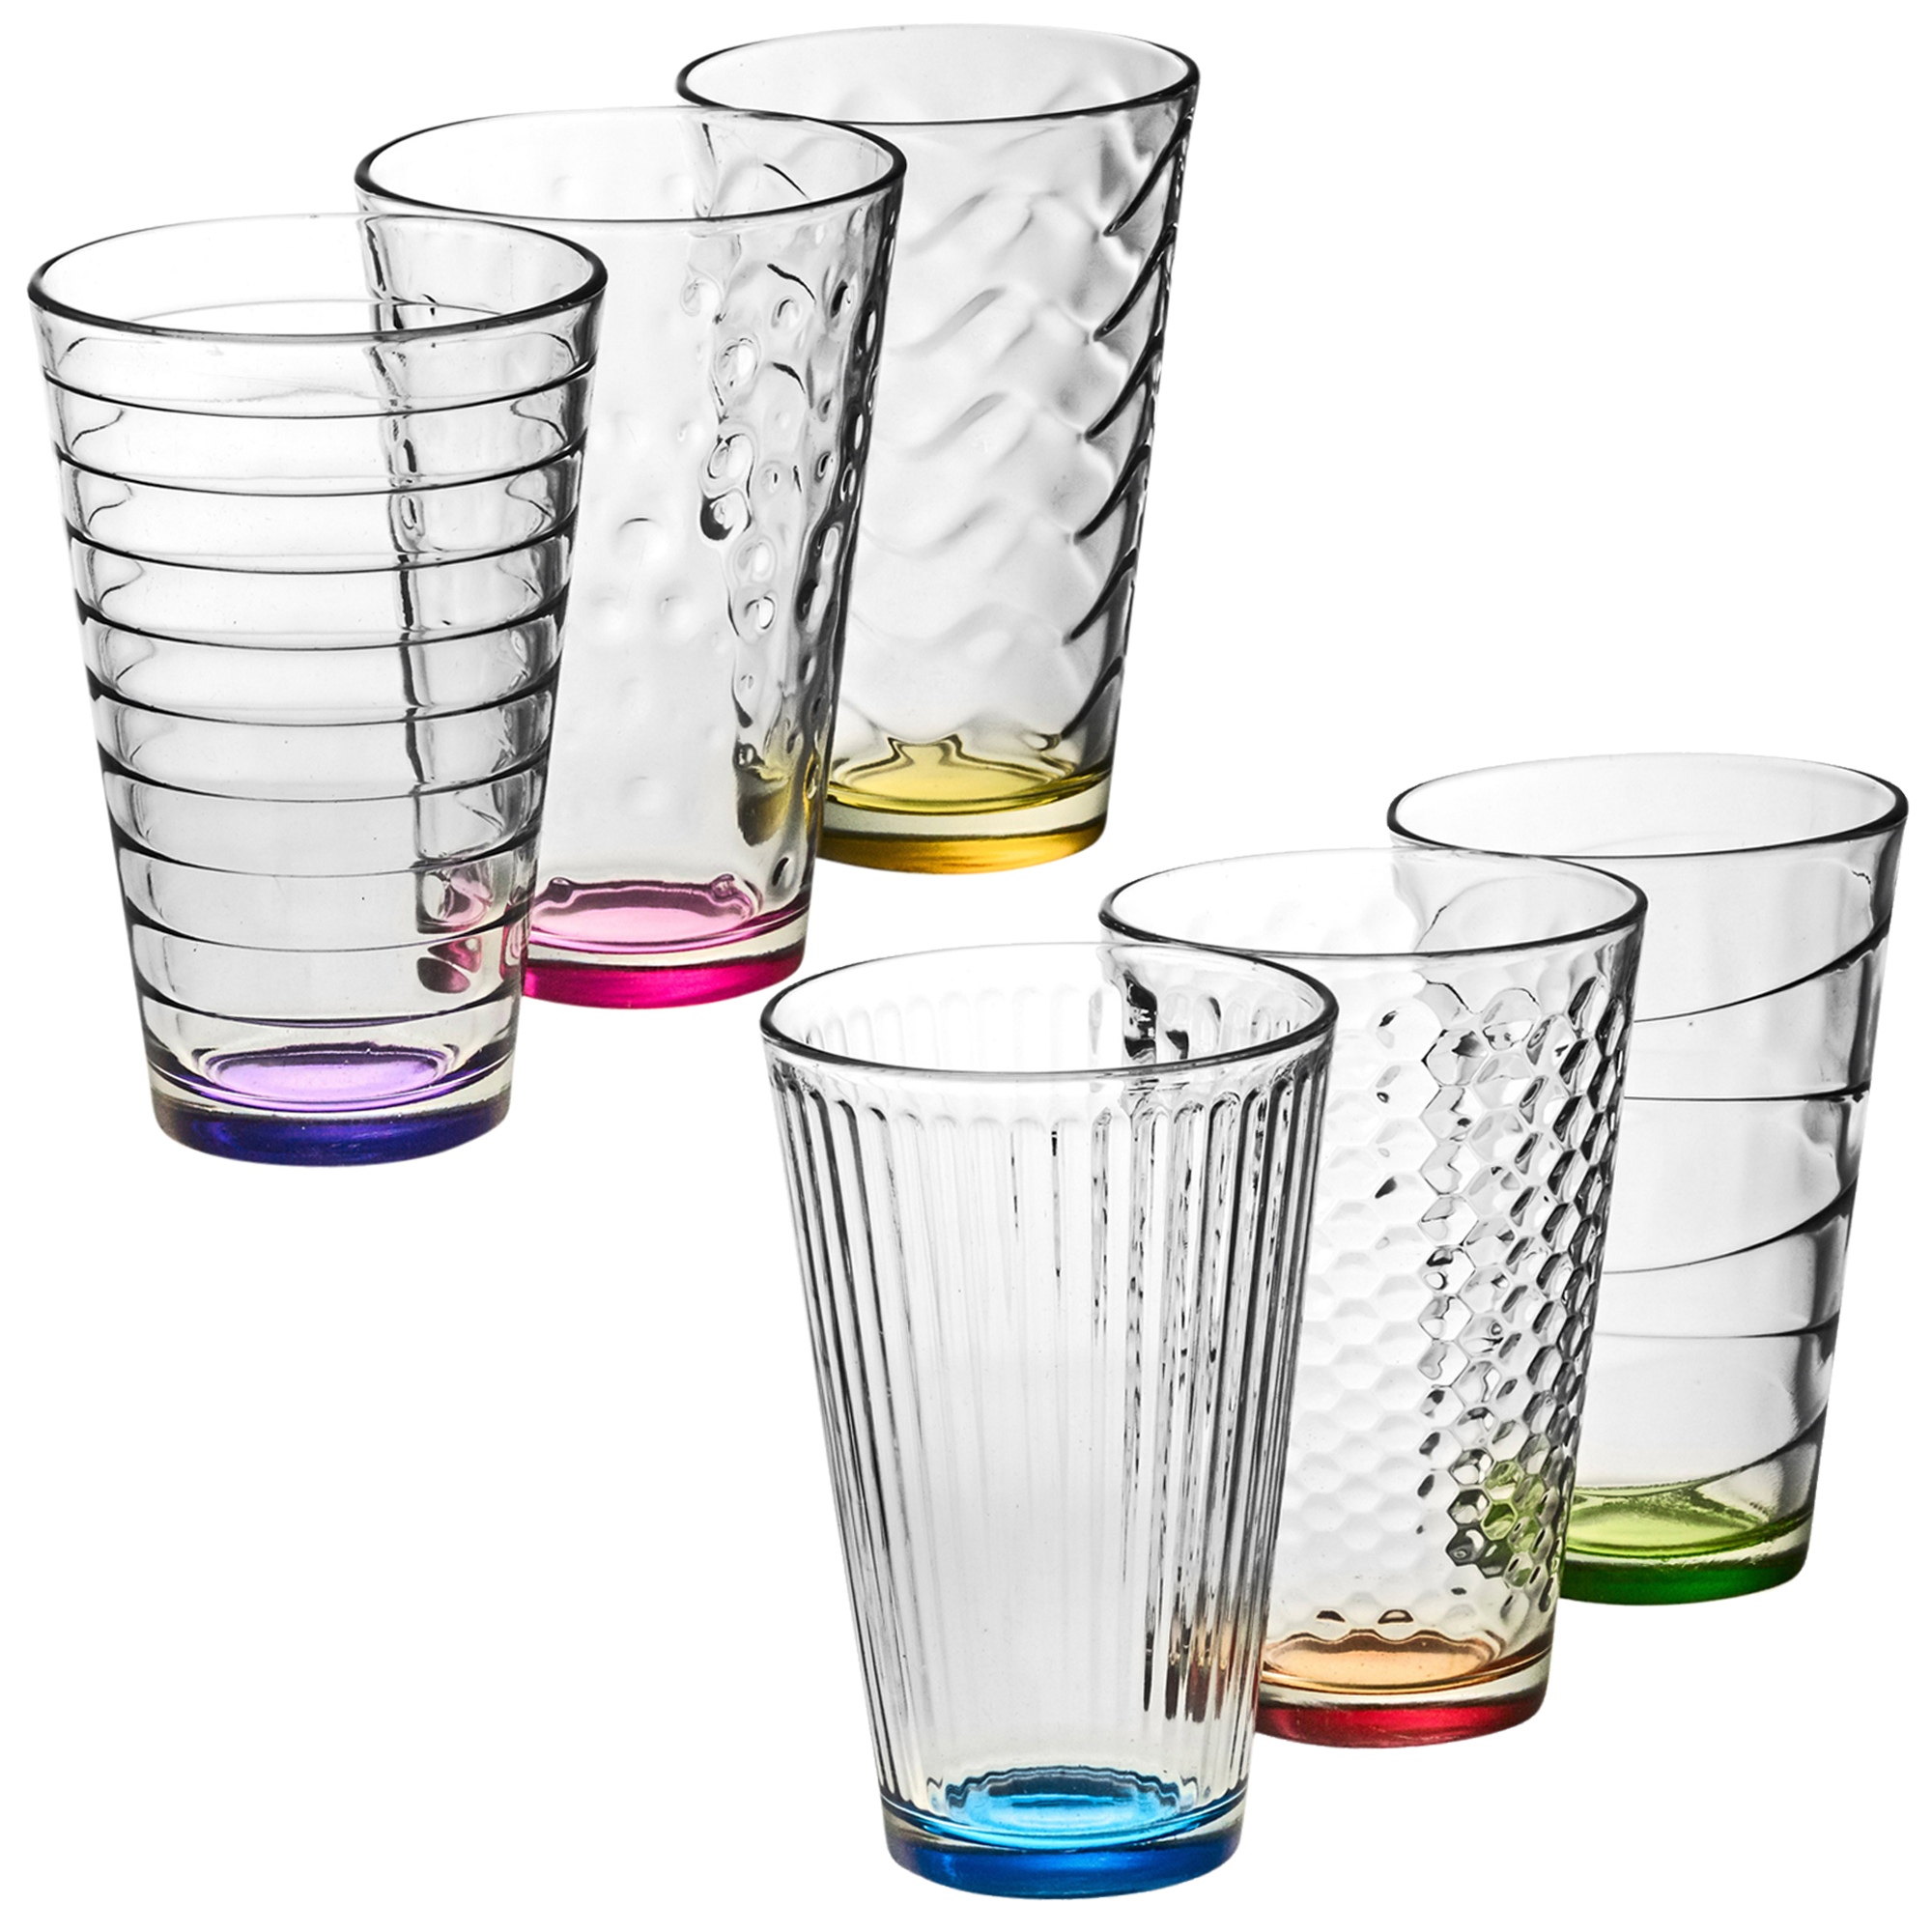 Types Of Drinking Glasses 12 Types Of Glassware Bar Wine Beer Etc Here Are 17 Types Of